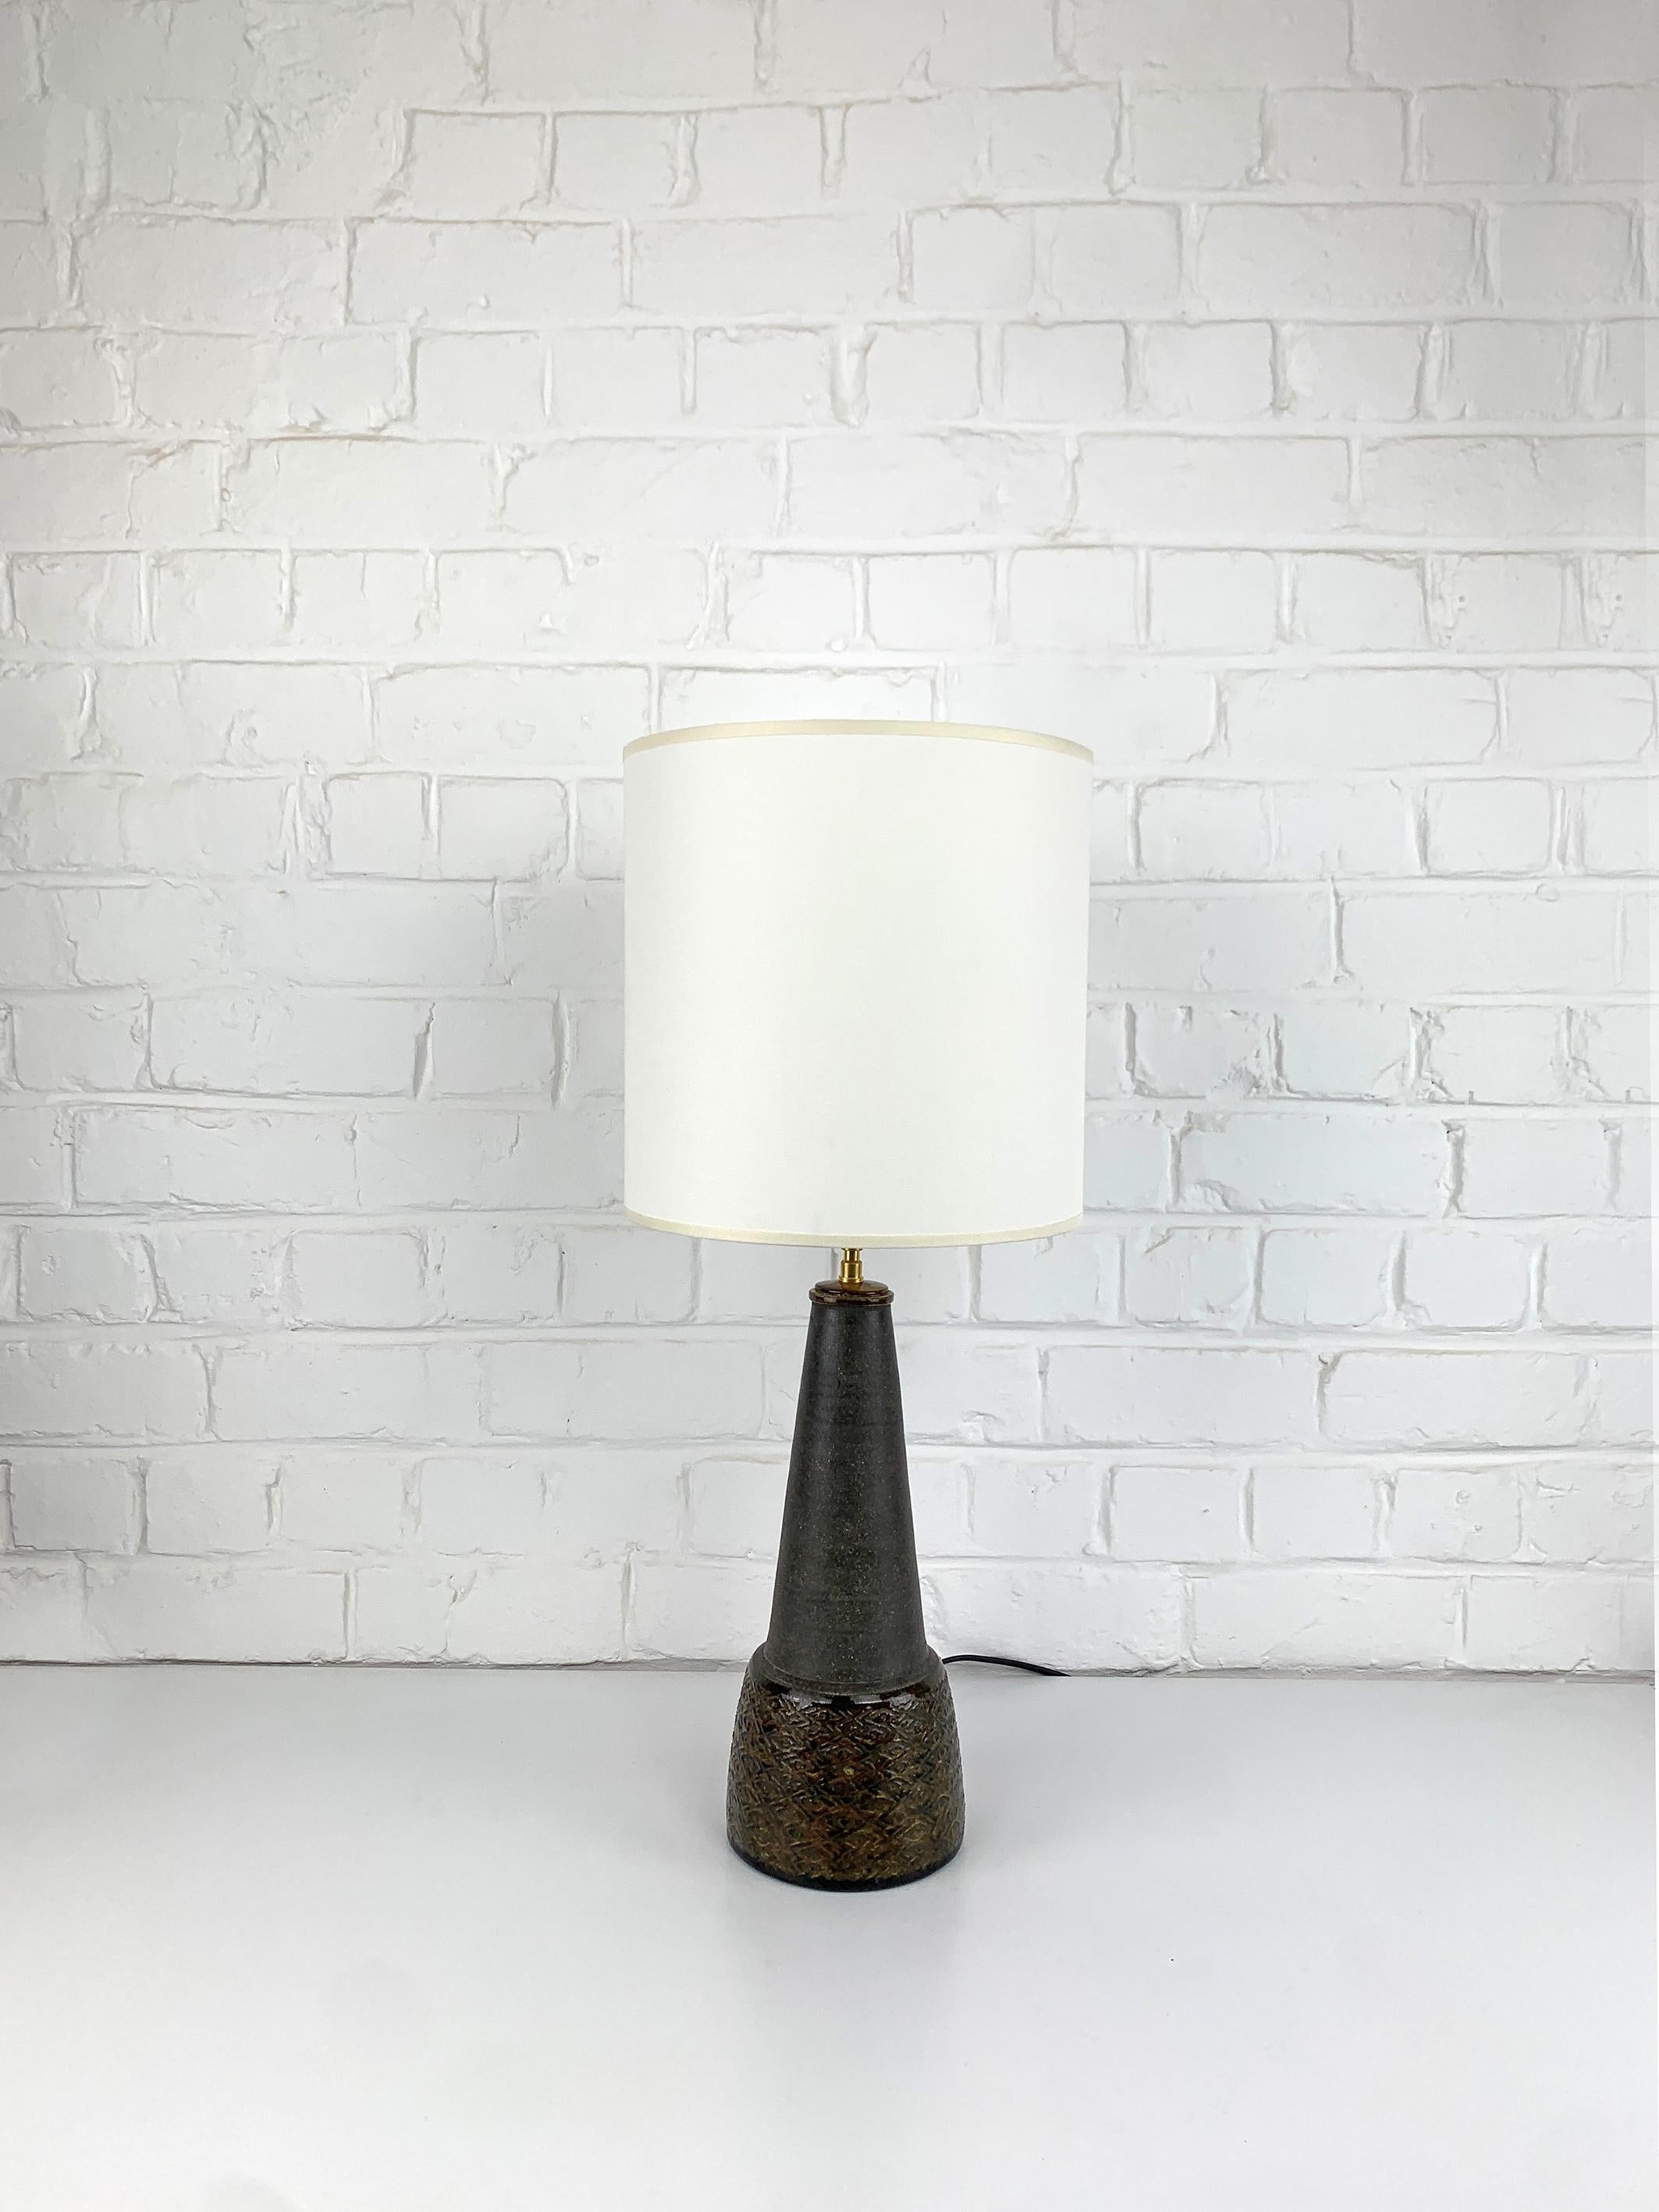 Stoneware table lamp finished in a combination of a dark uranium yellow / ocre glaze and natural dark brown stoneware finish. The lower glazed part is decorated with an impressed pattern.

Designed by Nils Kähler in the 1960s or 1970s. Manufactured